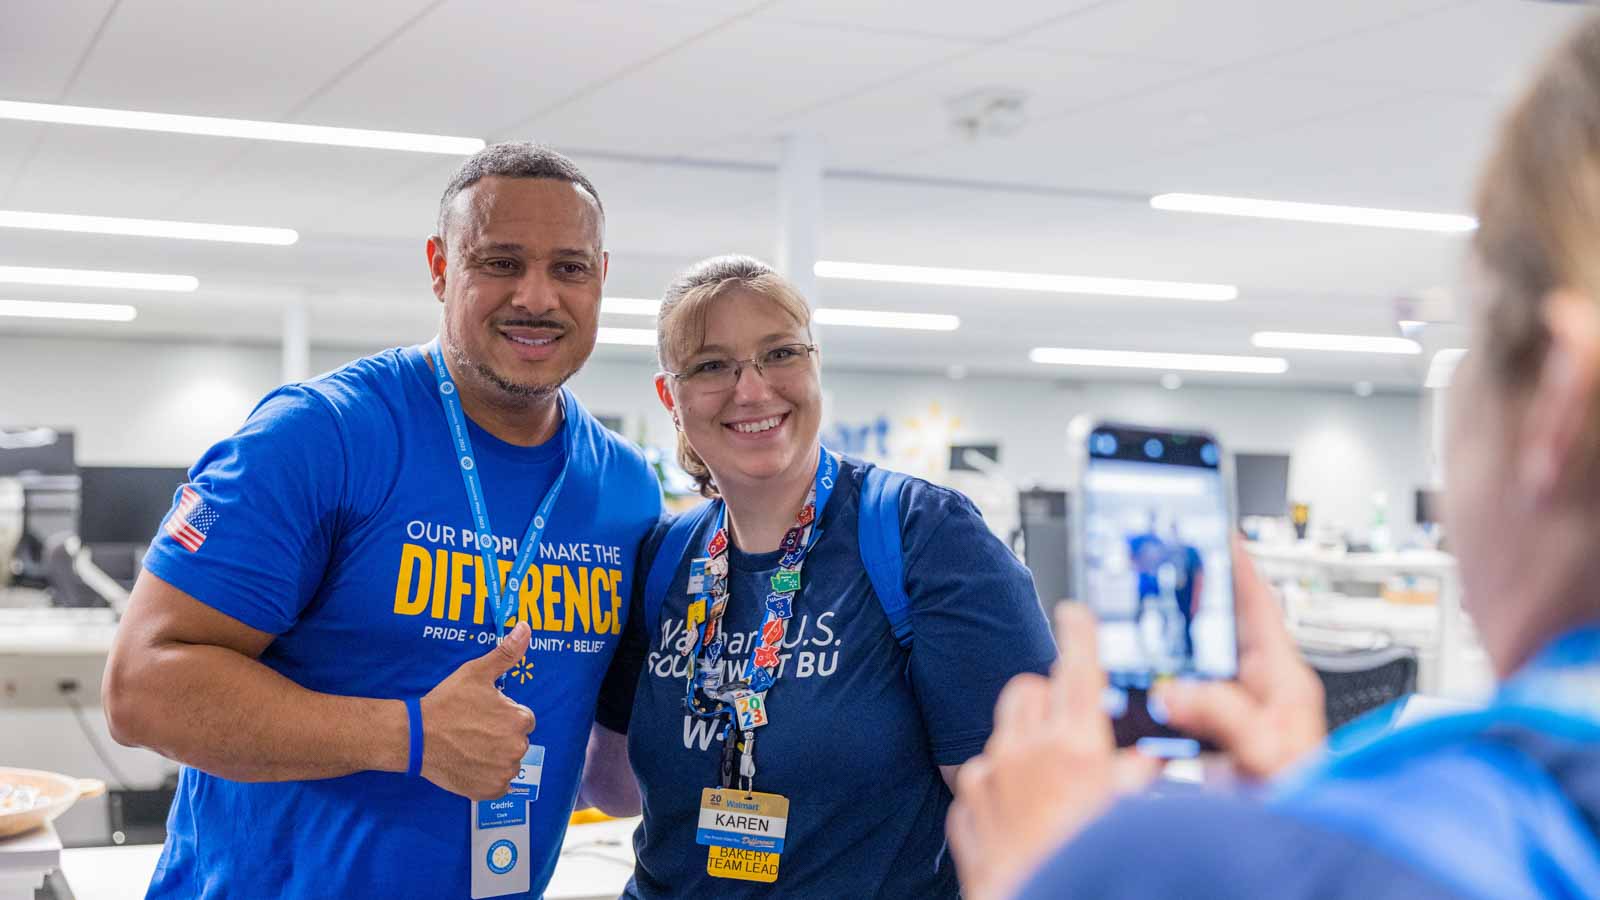 A female visiting associate meets Cedric Clark, Executive Vice President of Store Operations for Walmart U.S., during her Walmart Home Office tour.